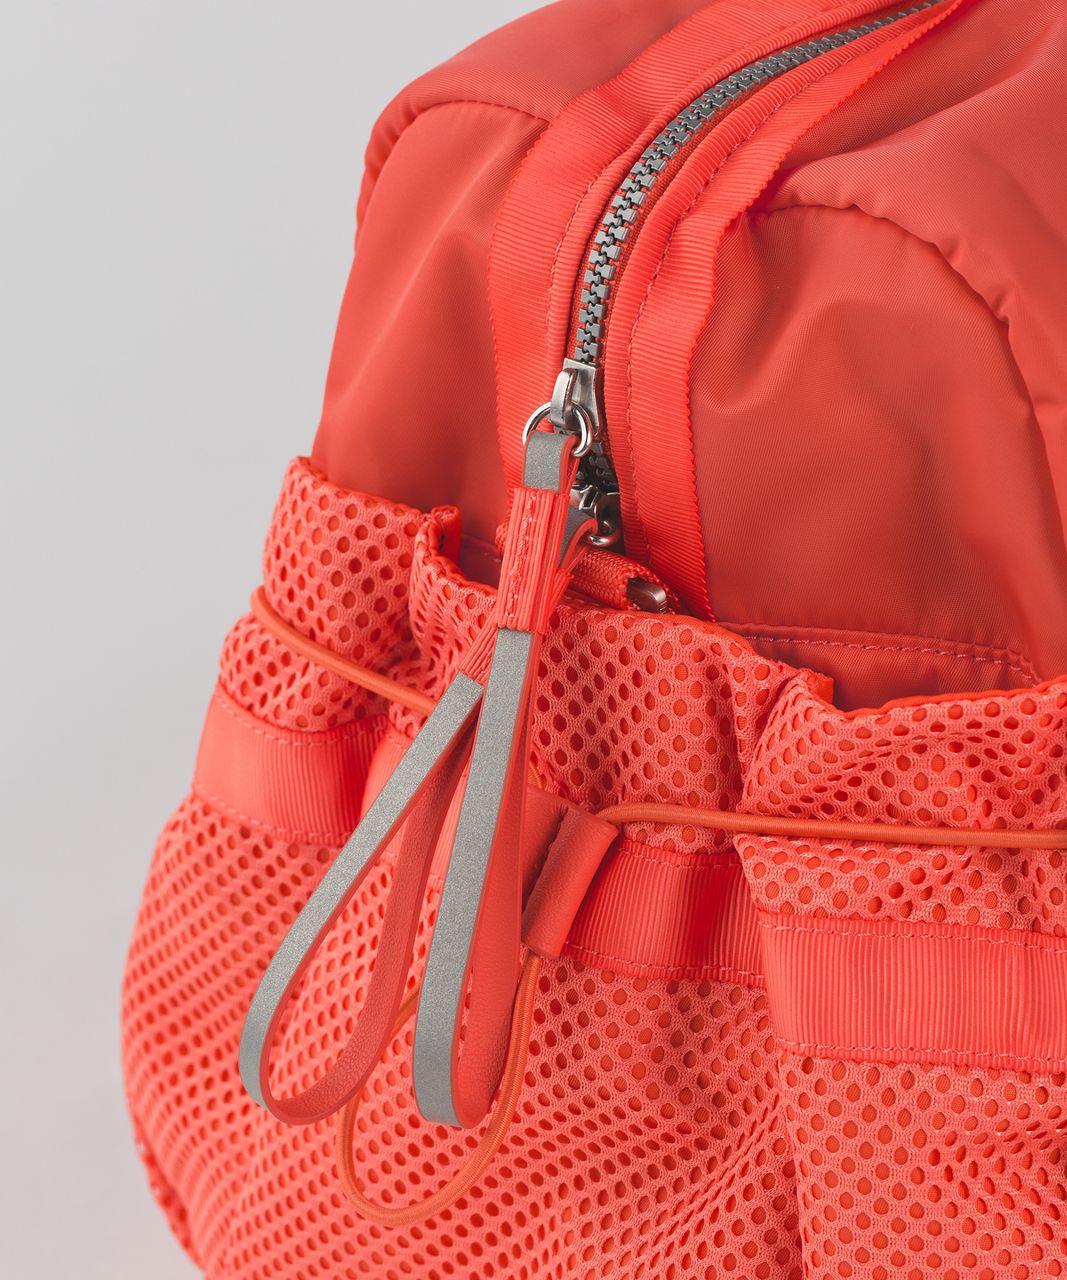 Lululemon Extra Mile Duffel - Cape Red / Sunny Coral